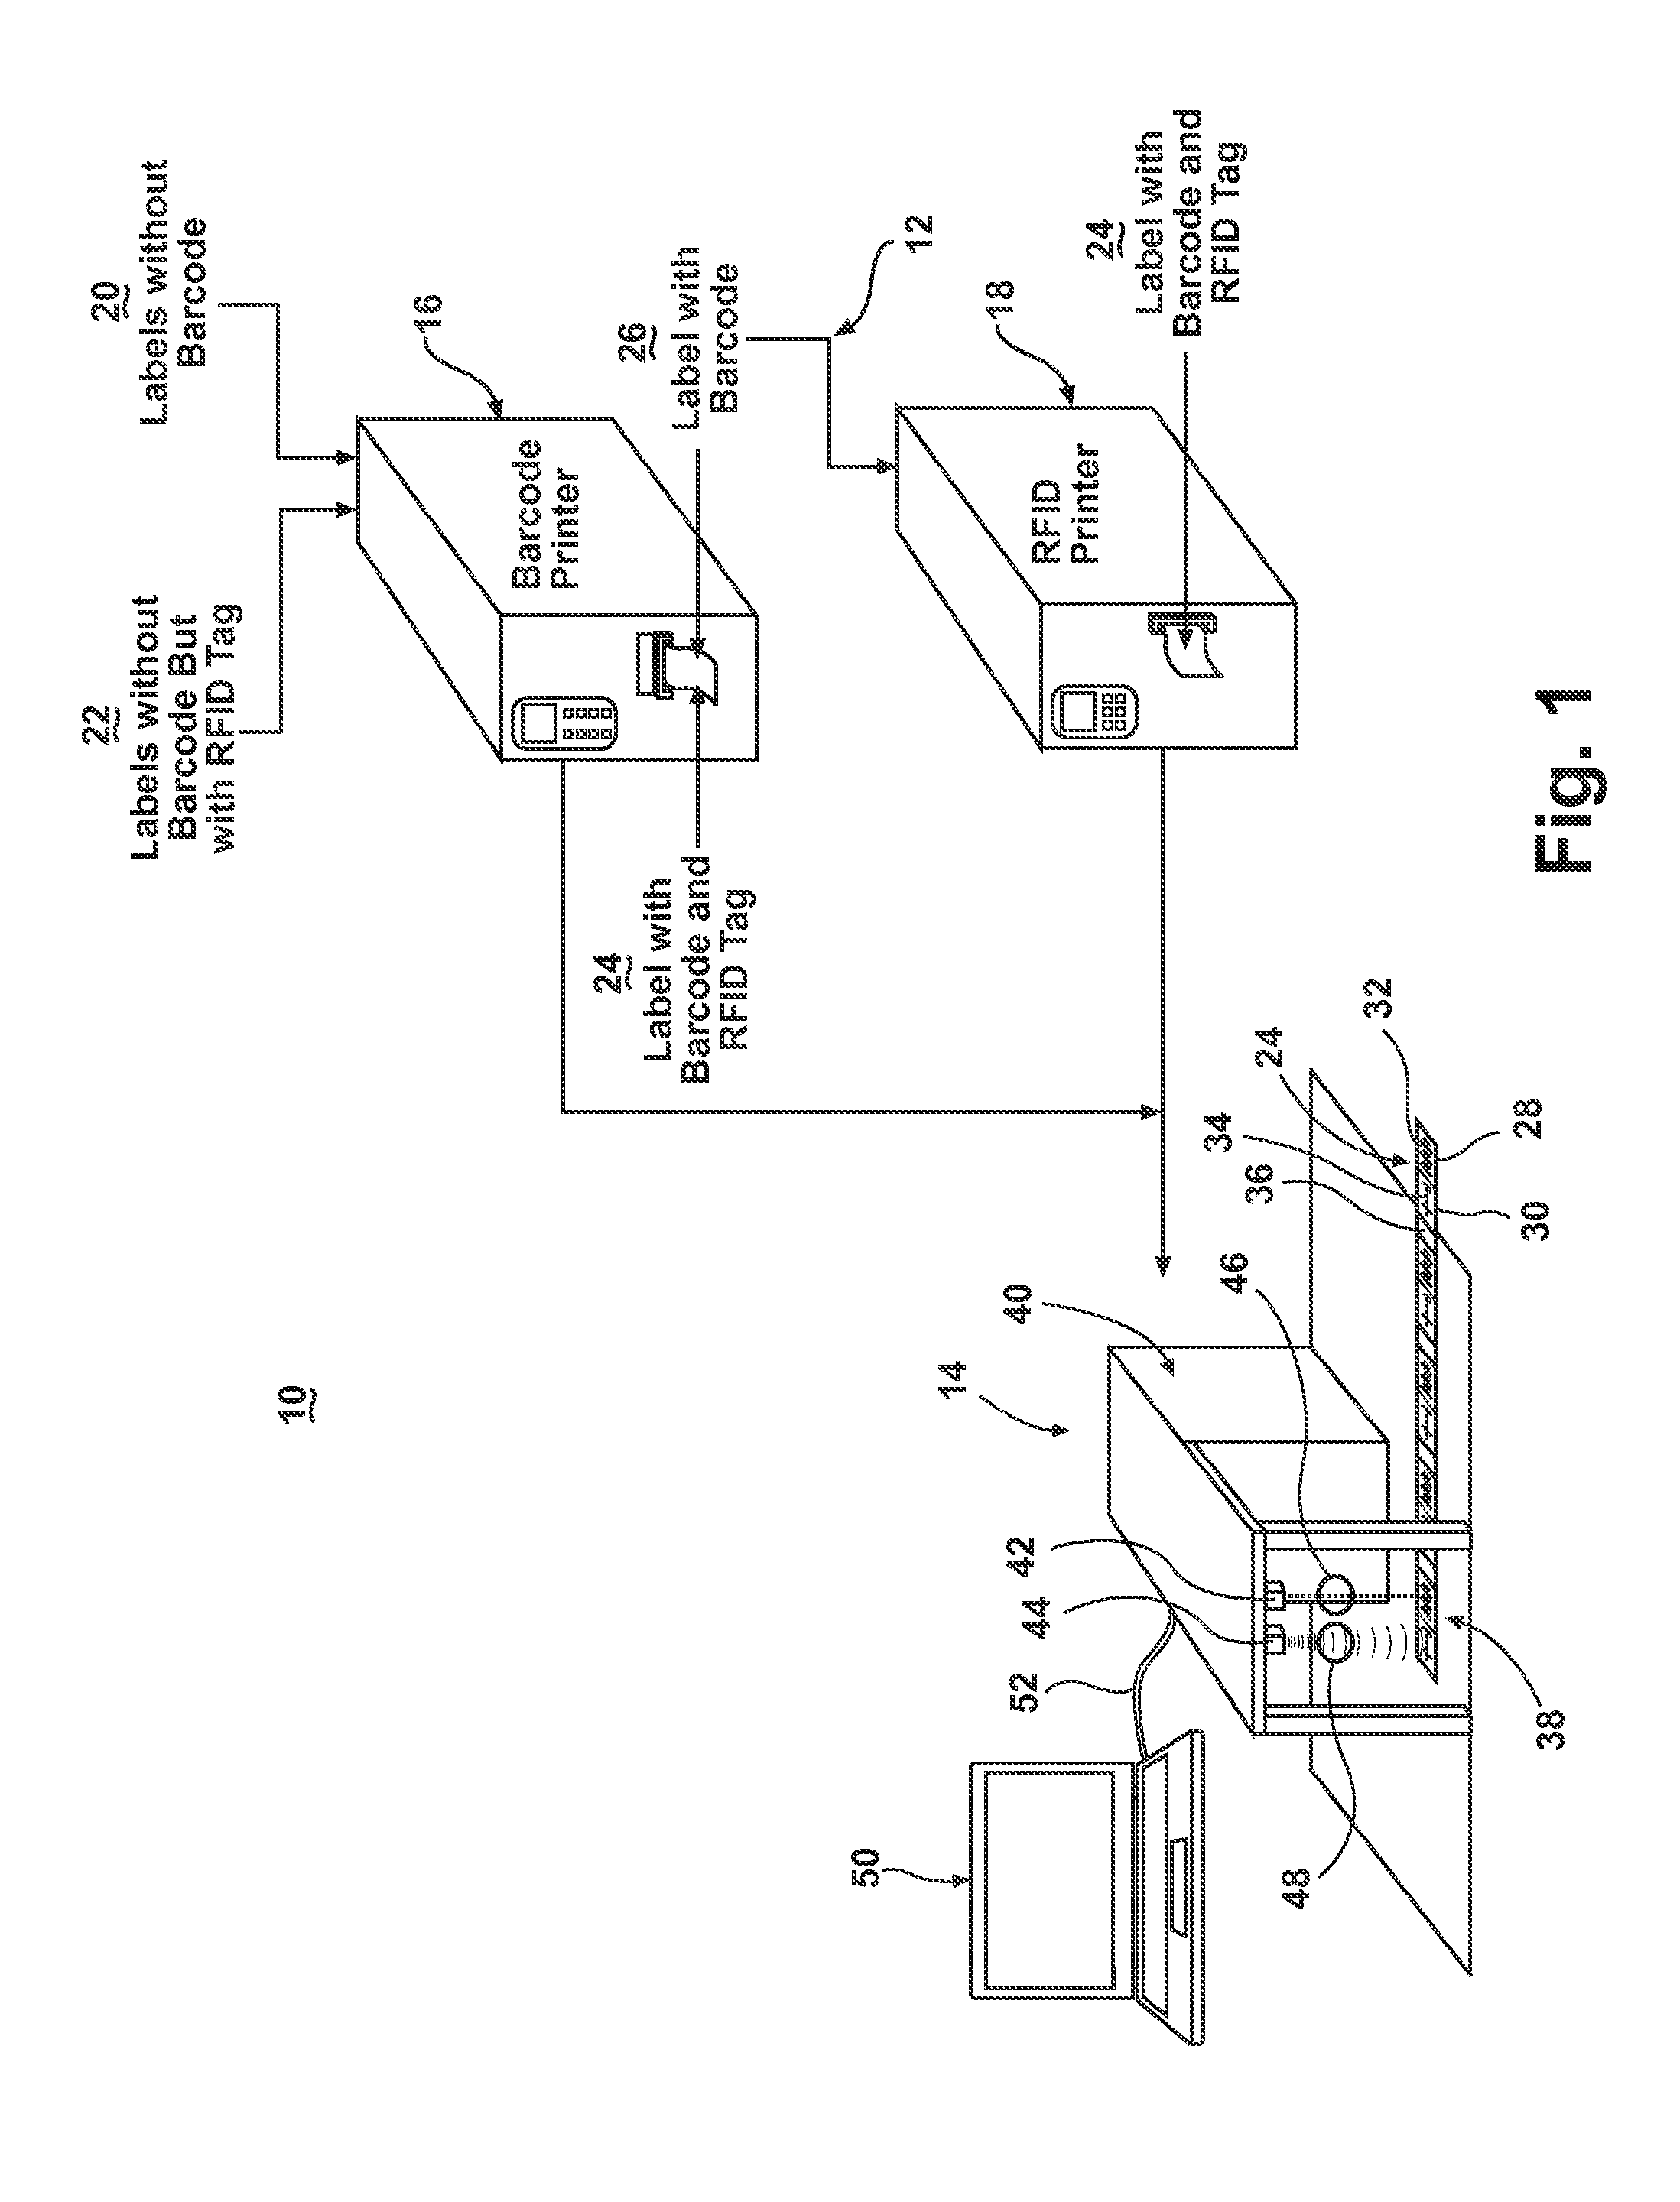 System for associating RFID tag with UPC code, and validating associative encoding of same